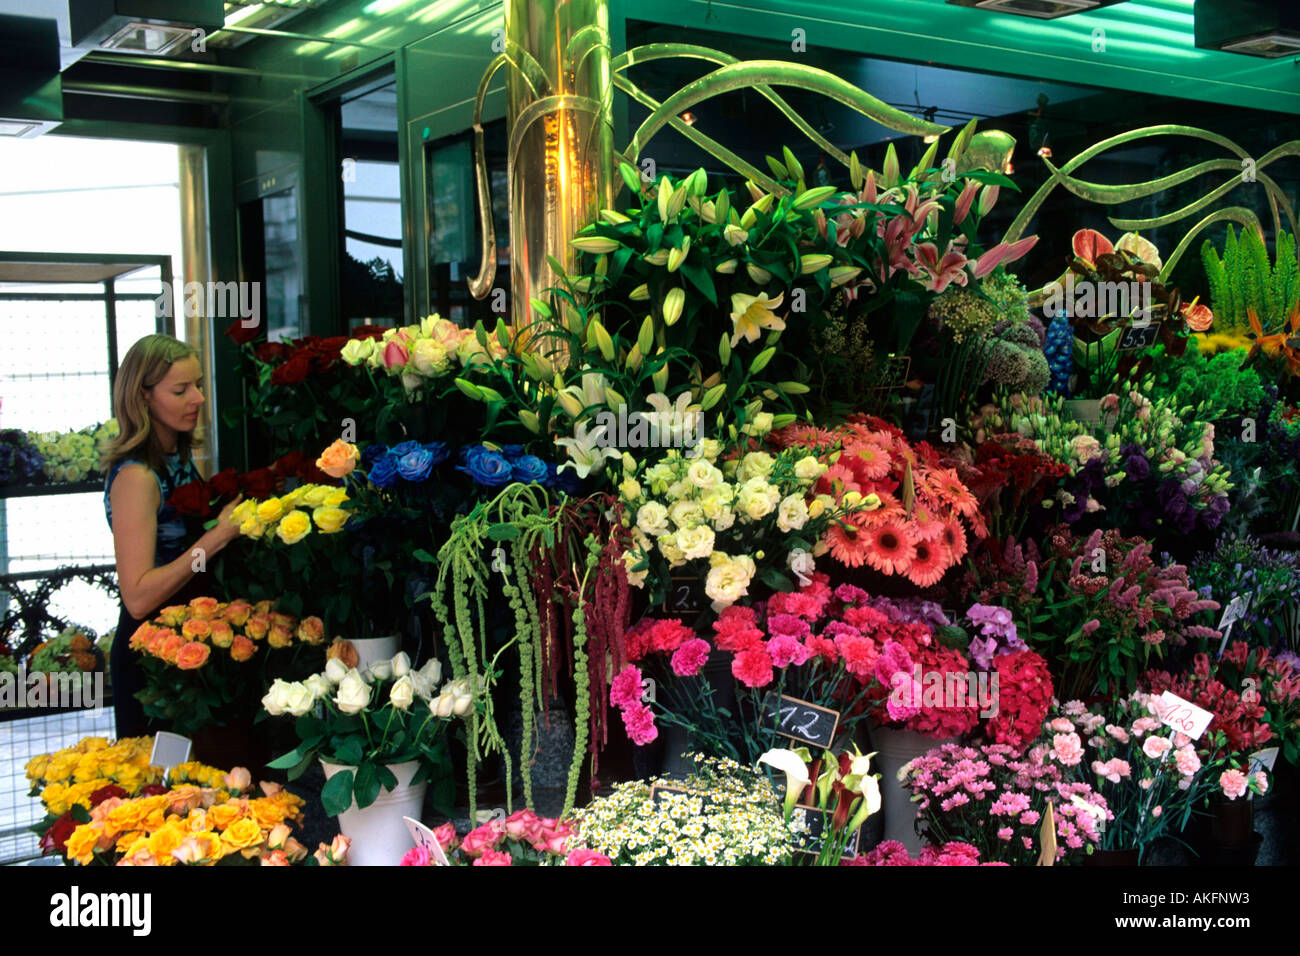 Blumenstand High Resolution Stock Photography and Images - Alamy